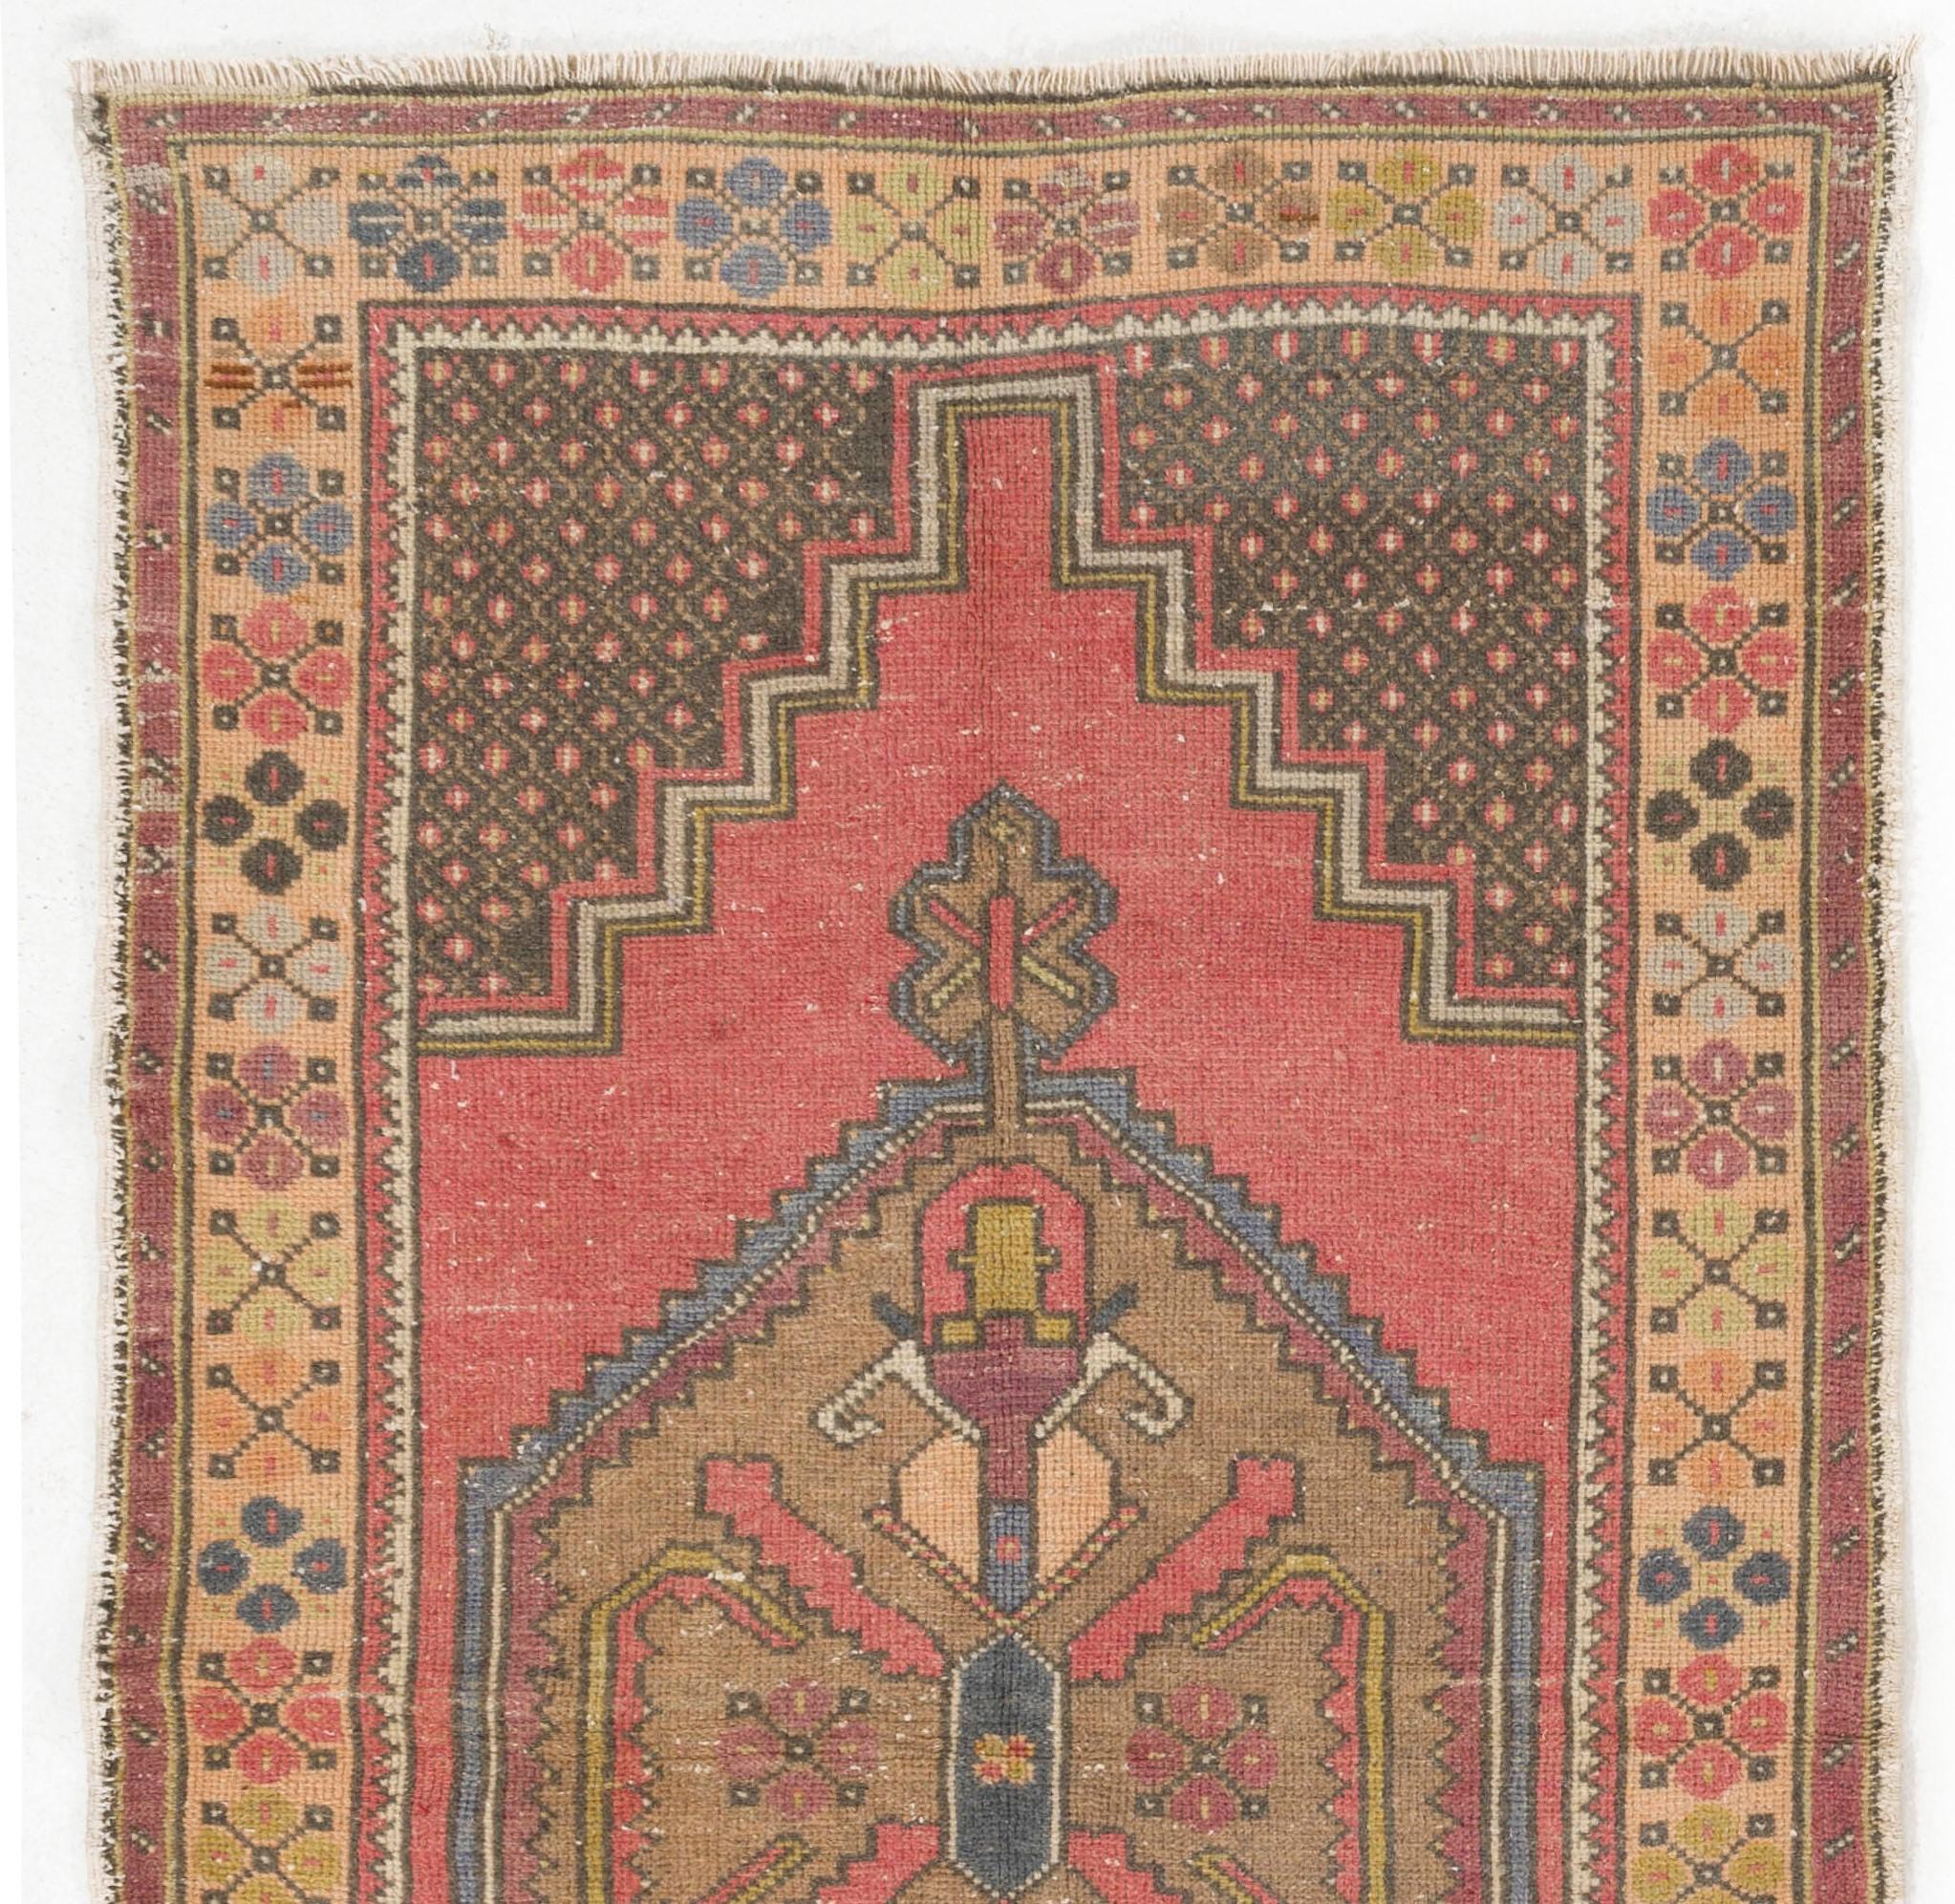 This vintage Central Anatolian rug features two linked medallions in deep-saturated gold with cross-shaped motifs inside against a plain field in soft muted soft red. The corner-pieces in charcoal gray are decorated with large, elongated palmettes.